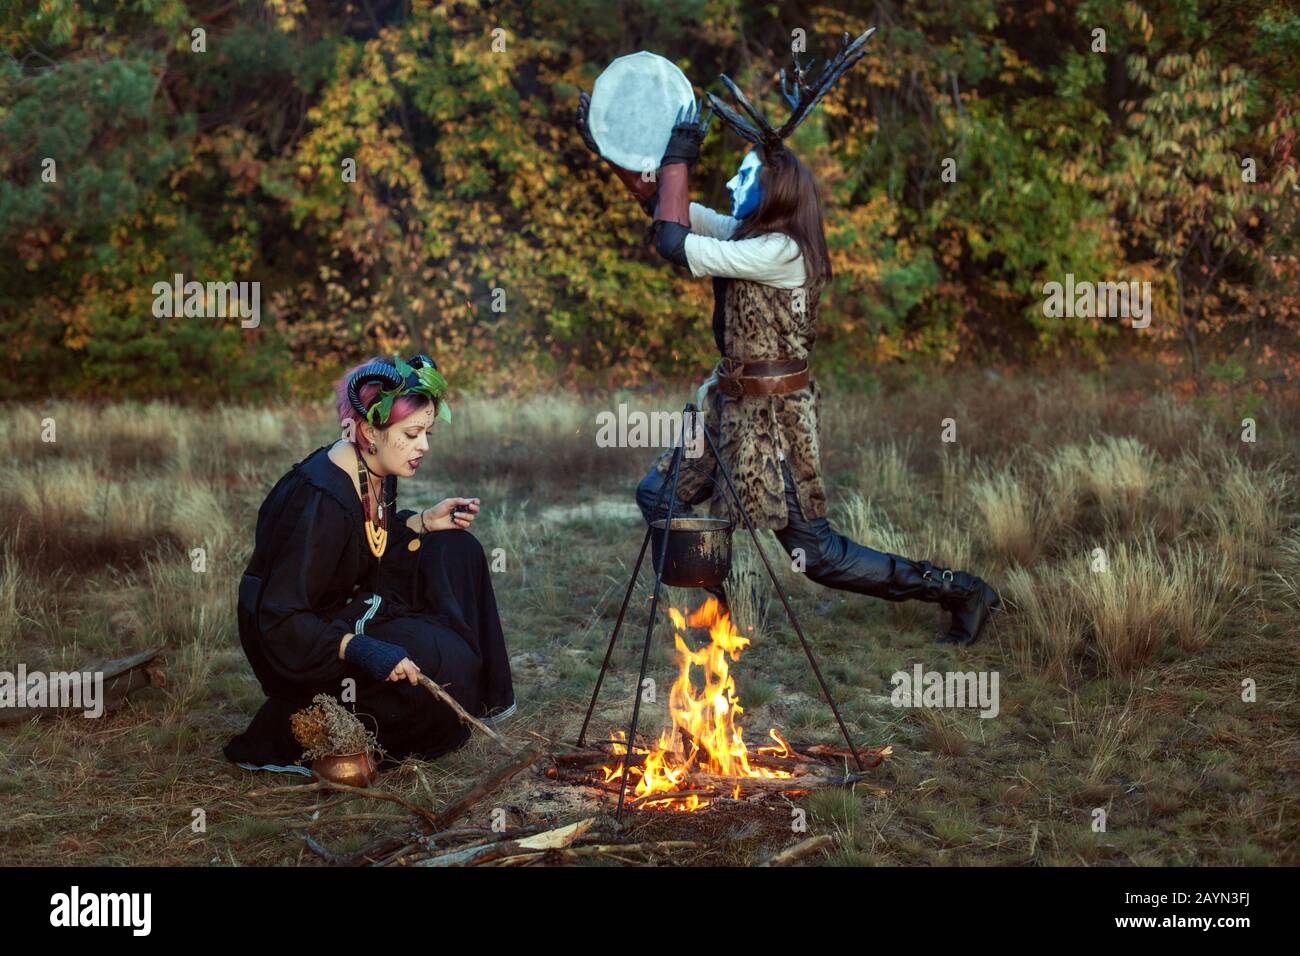 Shamans conduct ritual rites in the forest. They make a magic potion. Stock Photo